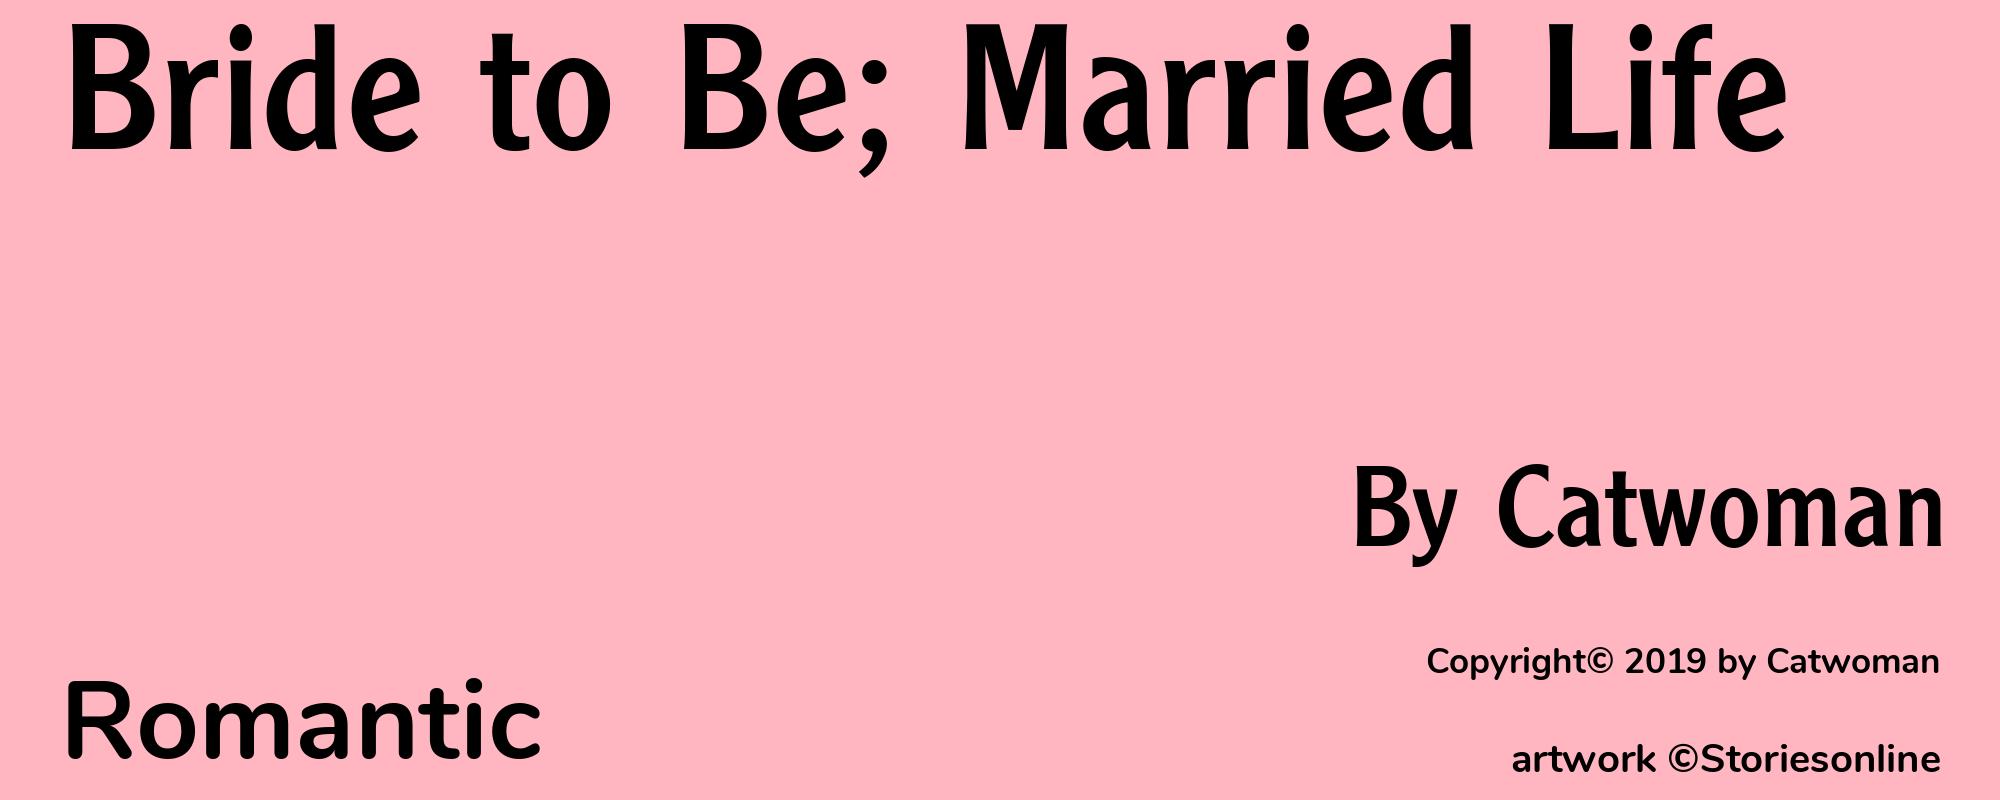 Bride to Be; Married Life - Cover